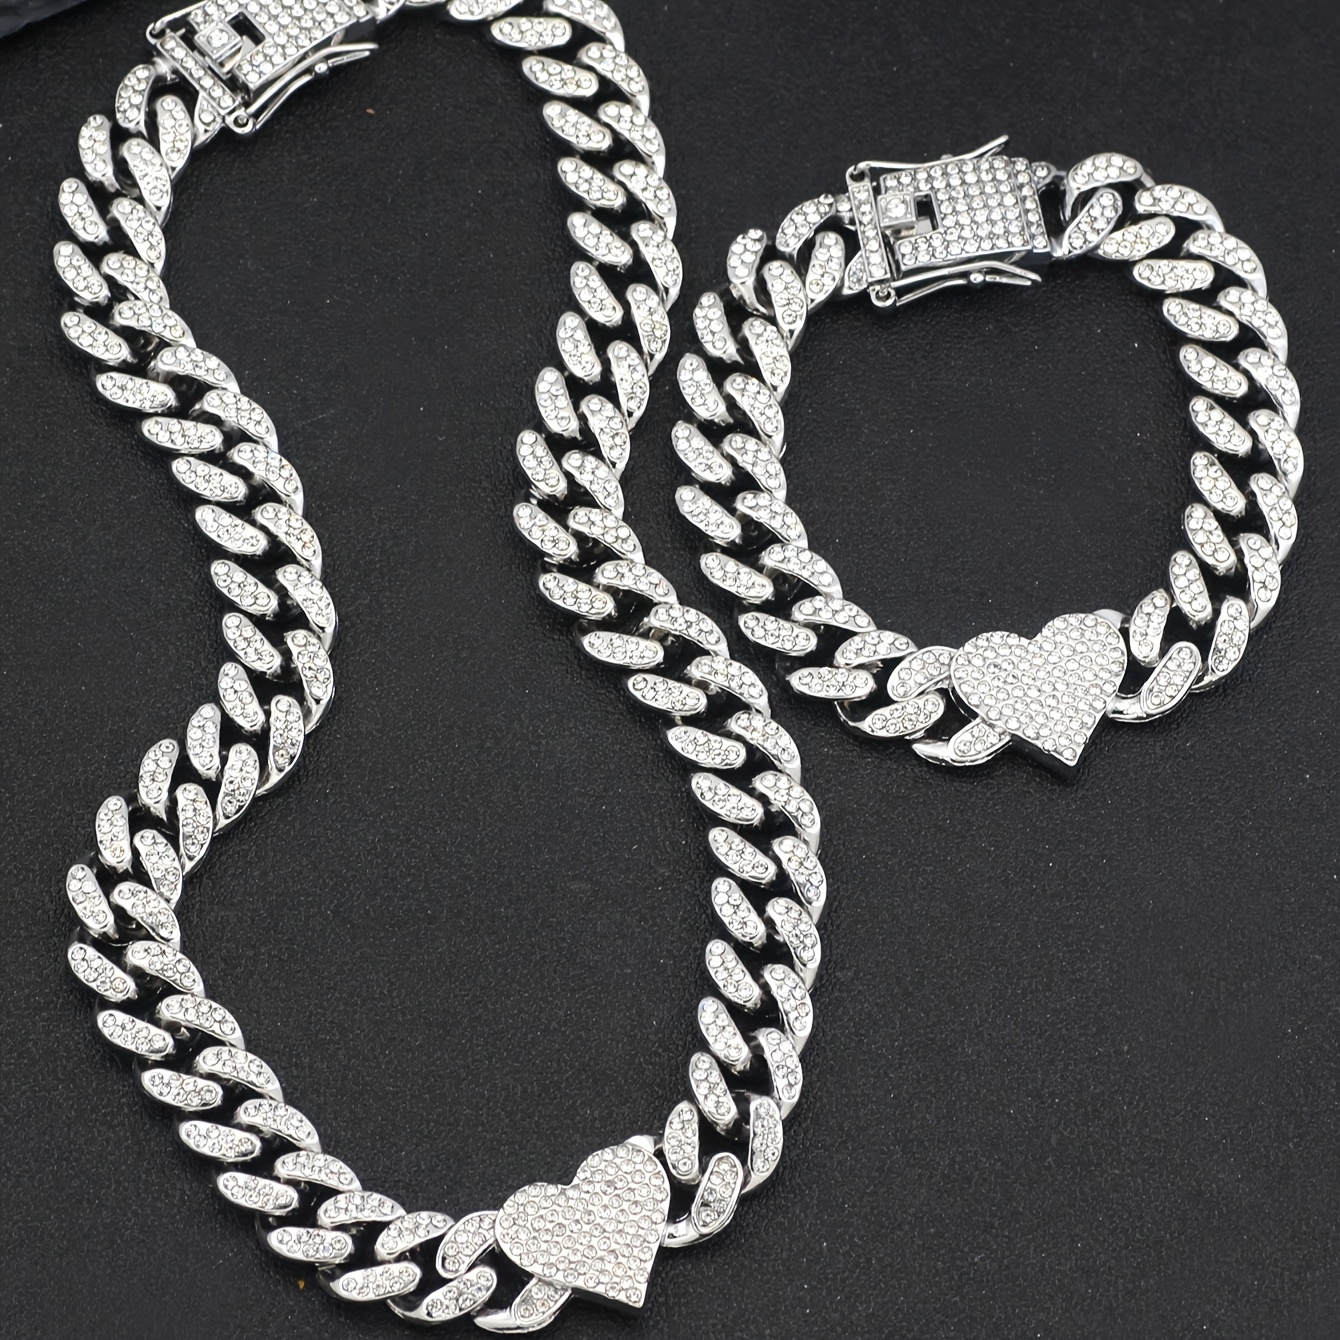 

2 Piece Set With Ice Cuban Chain Miami Necklace Men And Women Hip Hop Bracelet Choker Necklace Set Jewelry Gift